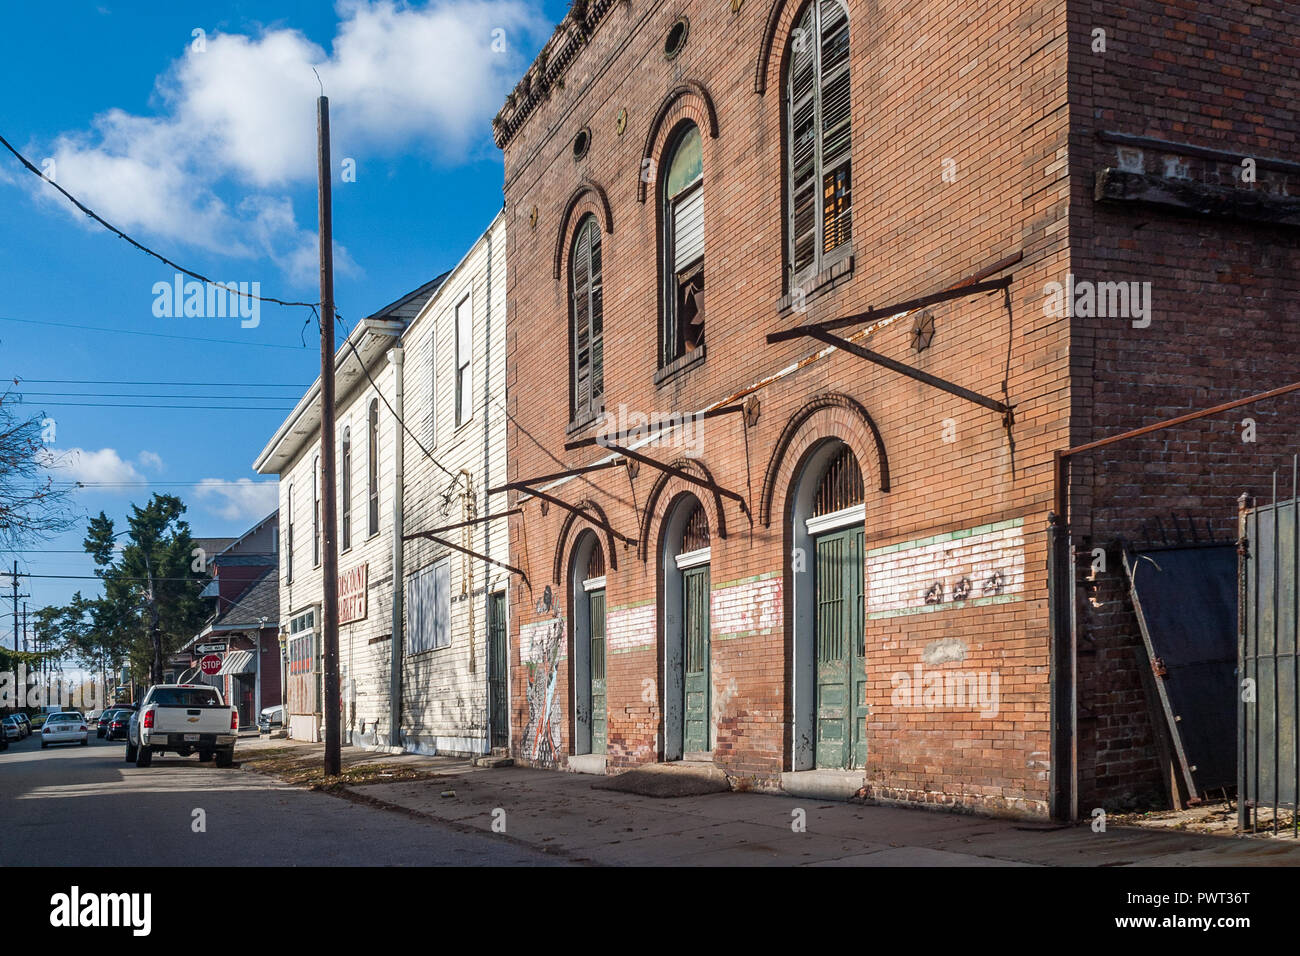 Exterior of commercial building in New Orleans Stock Photo